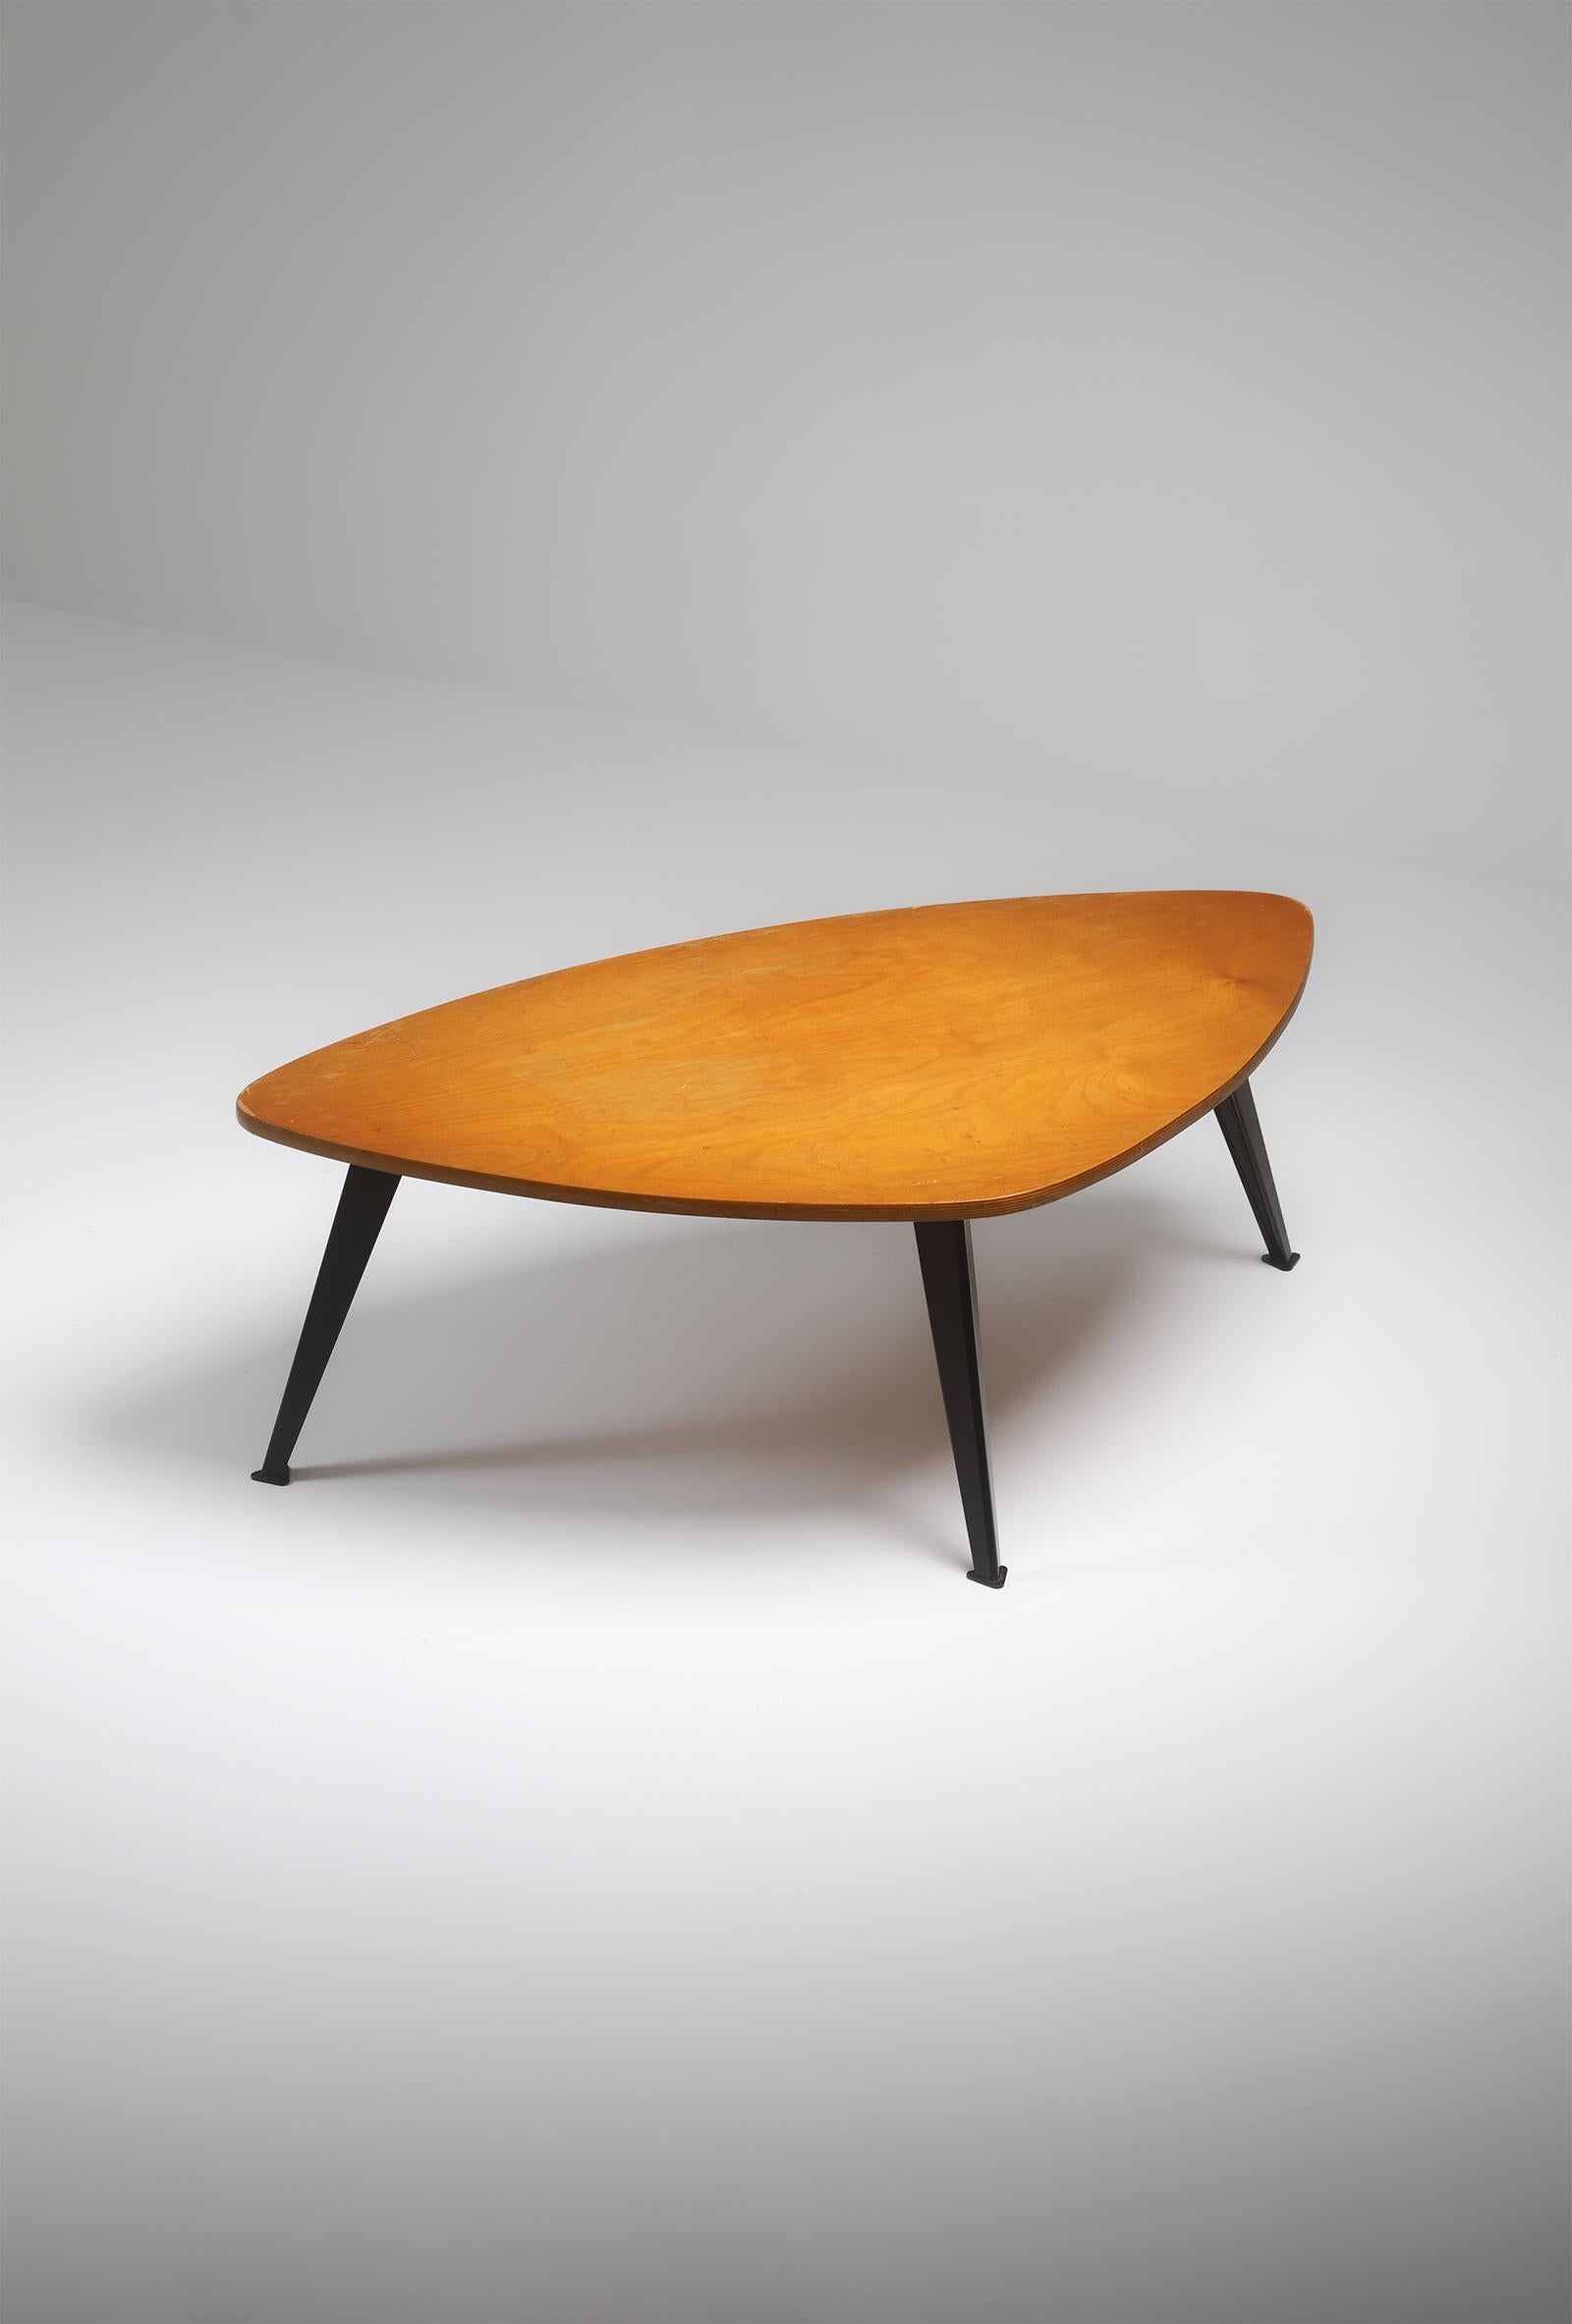 This coffee table dates back from the 50s and are rare finds in the category of Belgian furniture designs.